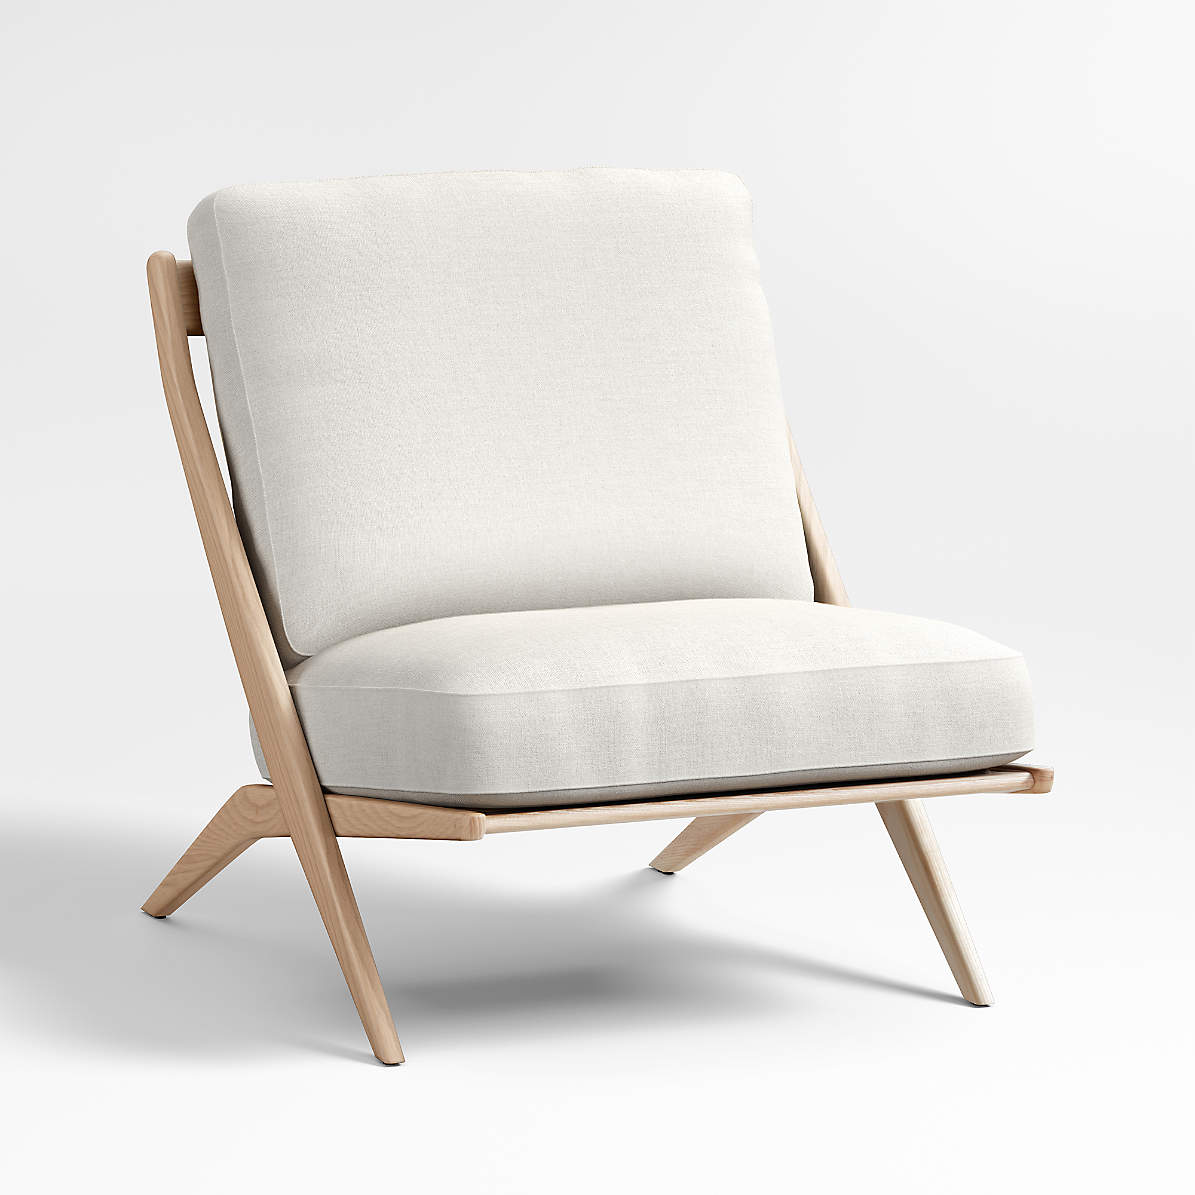 Pose Natural Accent Chair Crate And Barrel